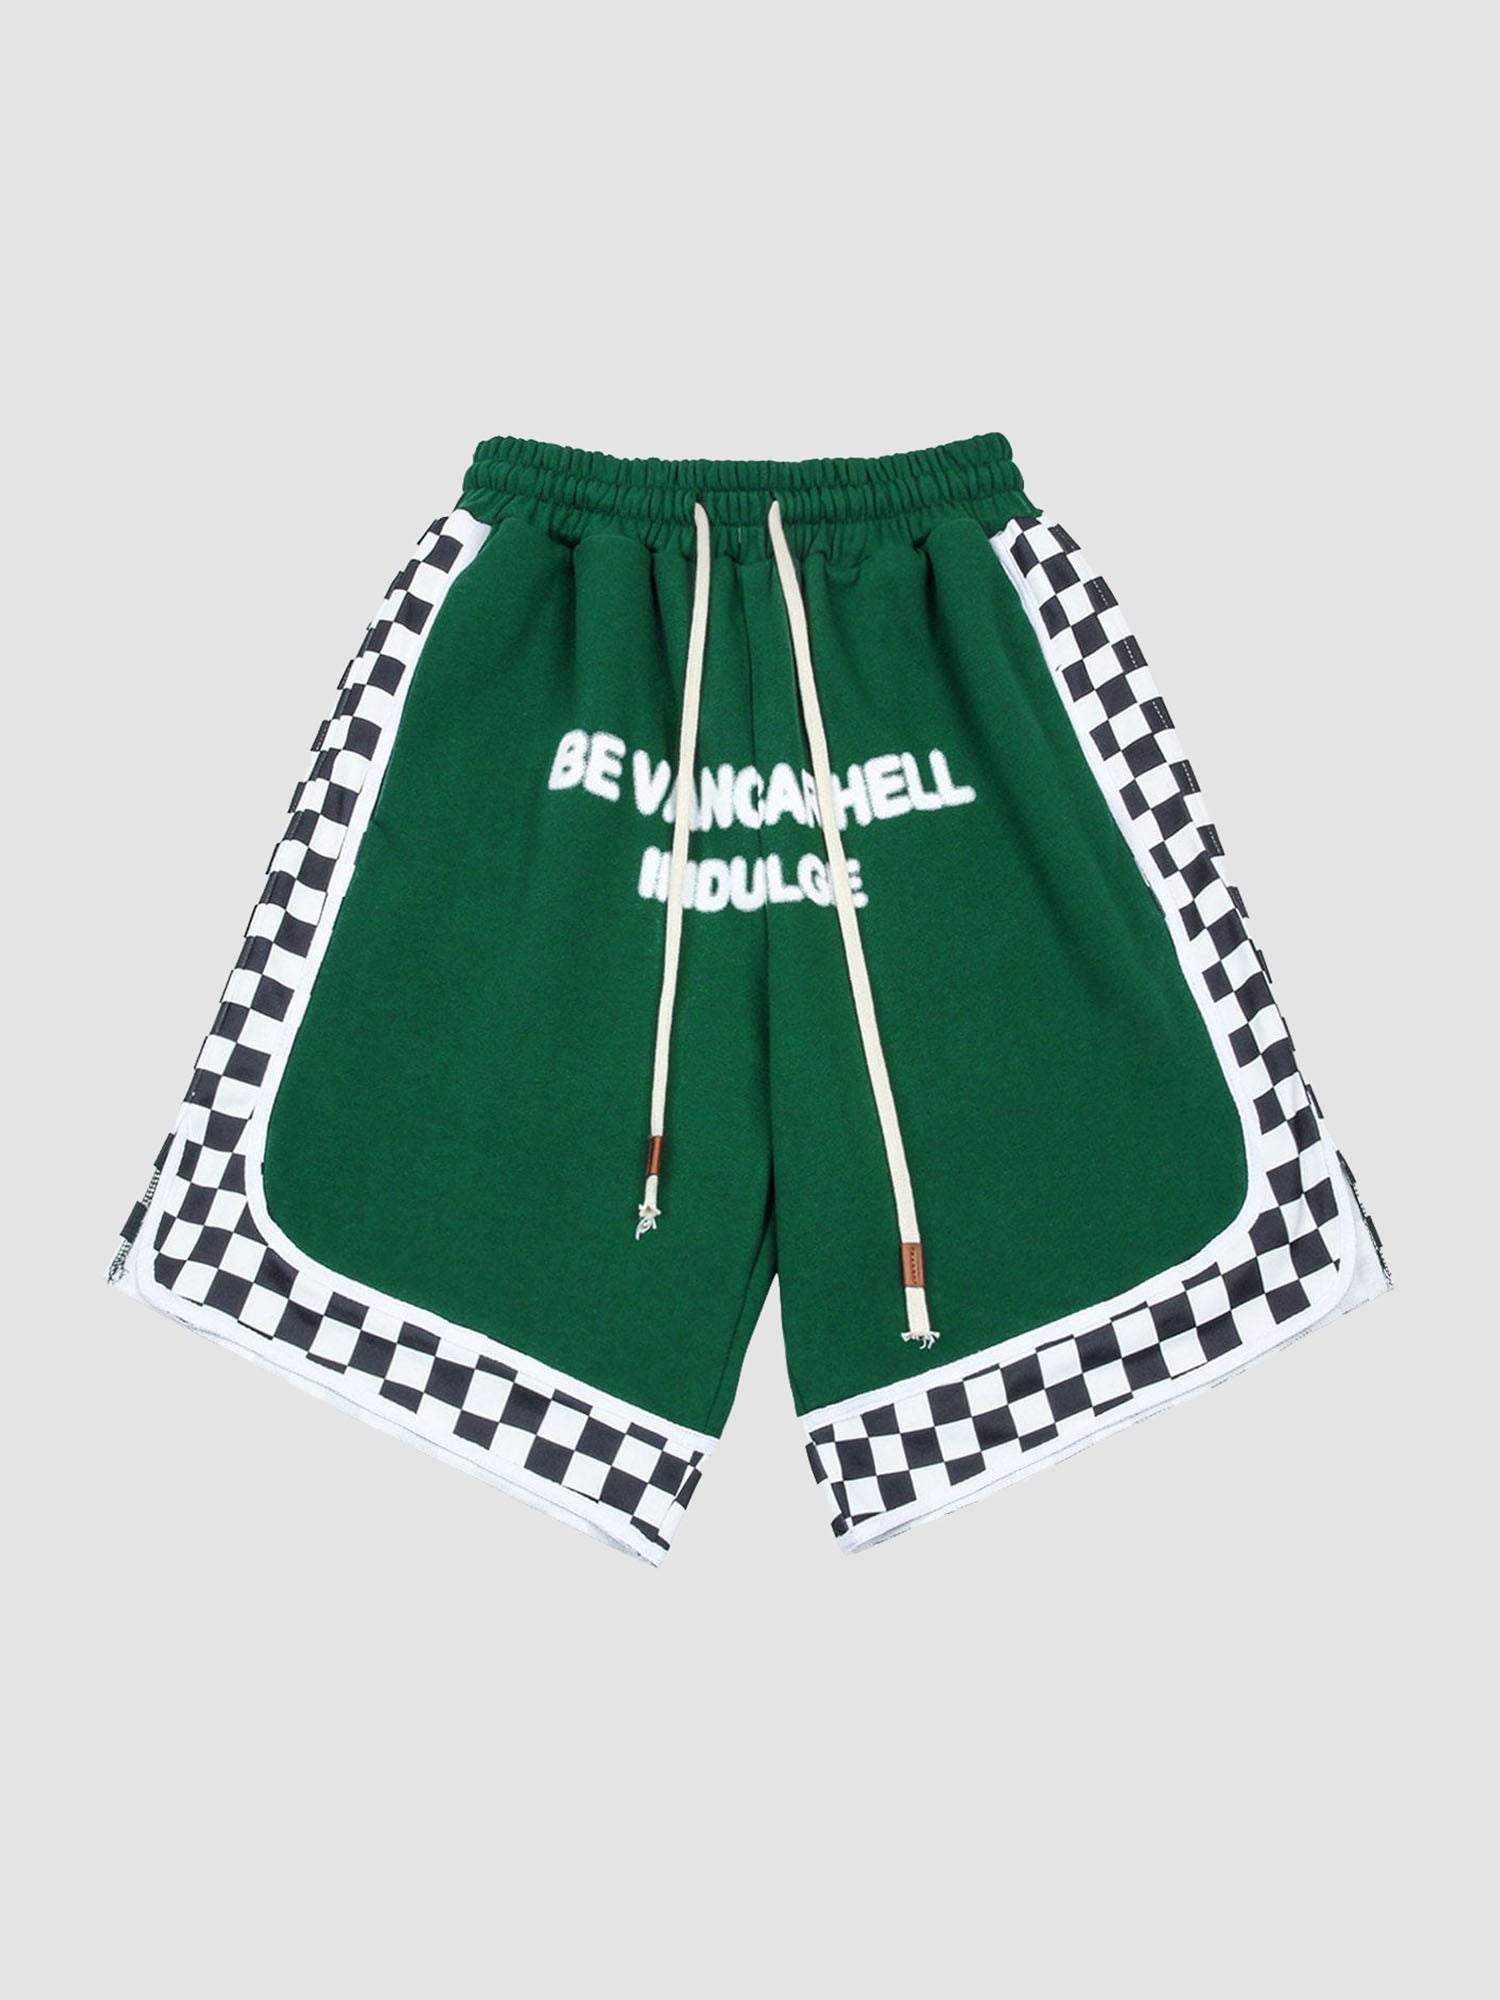 JUSTNOTAG Letter Print Side Checkerboard Shorts